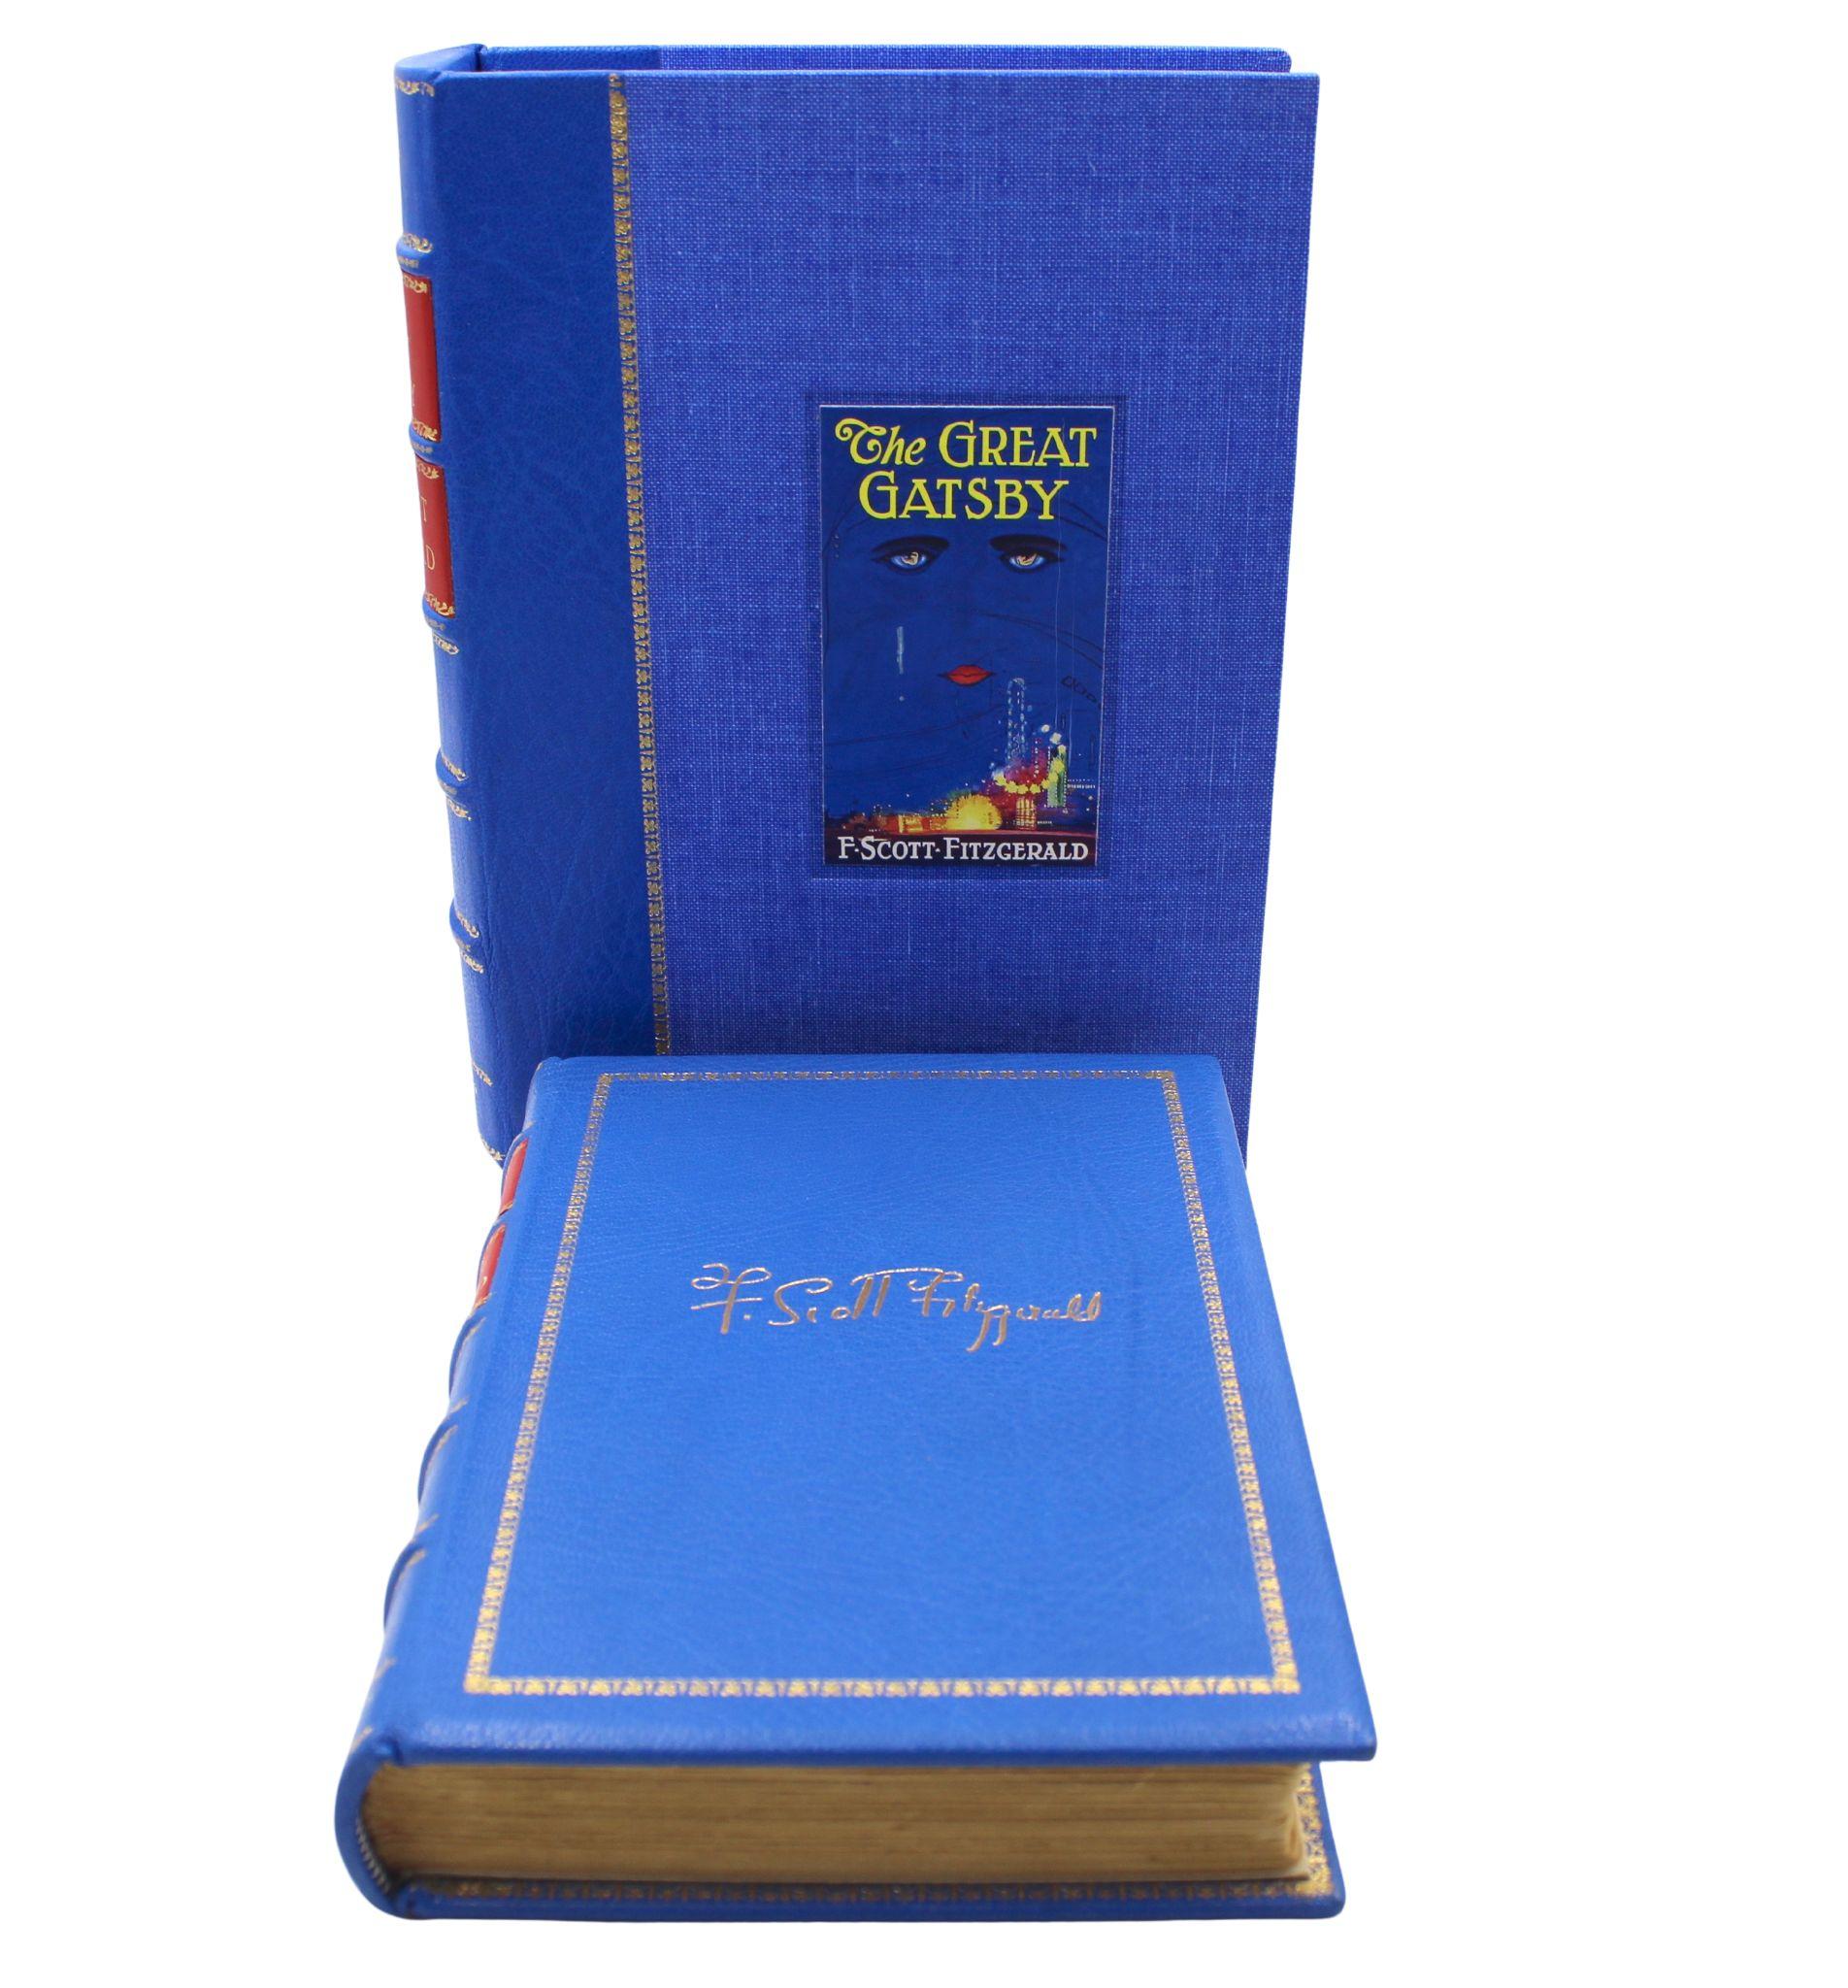 Fitzgerald, F. Scott, The Great Gatsby. New York: Charles Scribner’s Sons, 1925. First edition, first printing. Rebound in full blue morocco leather with gilt tooling, raised bands and gilt tooling to the spine, and a matching ¼ blue leather and